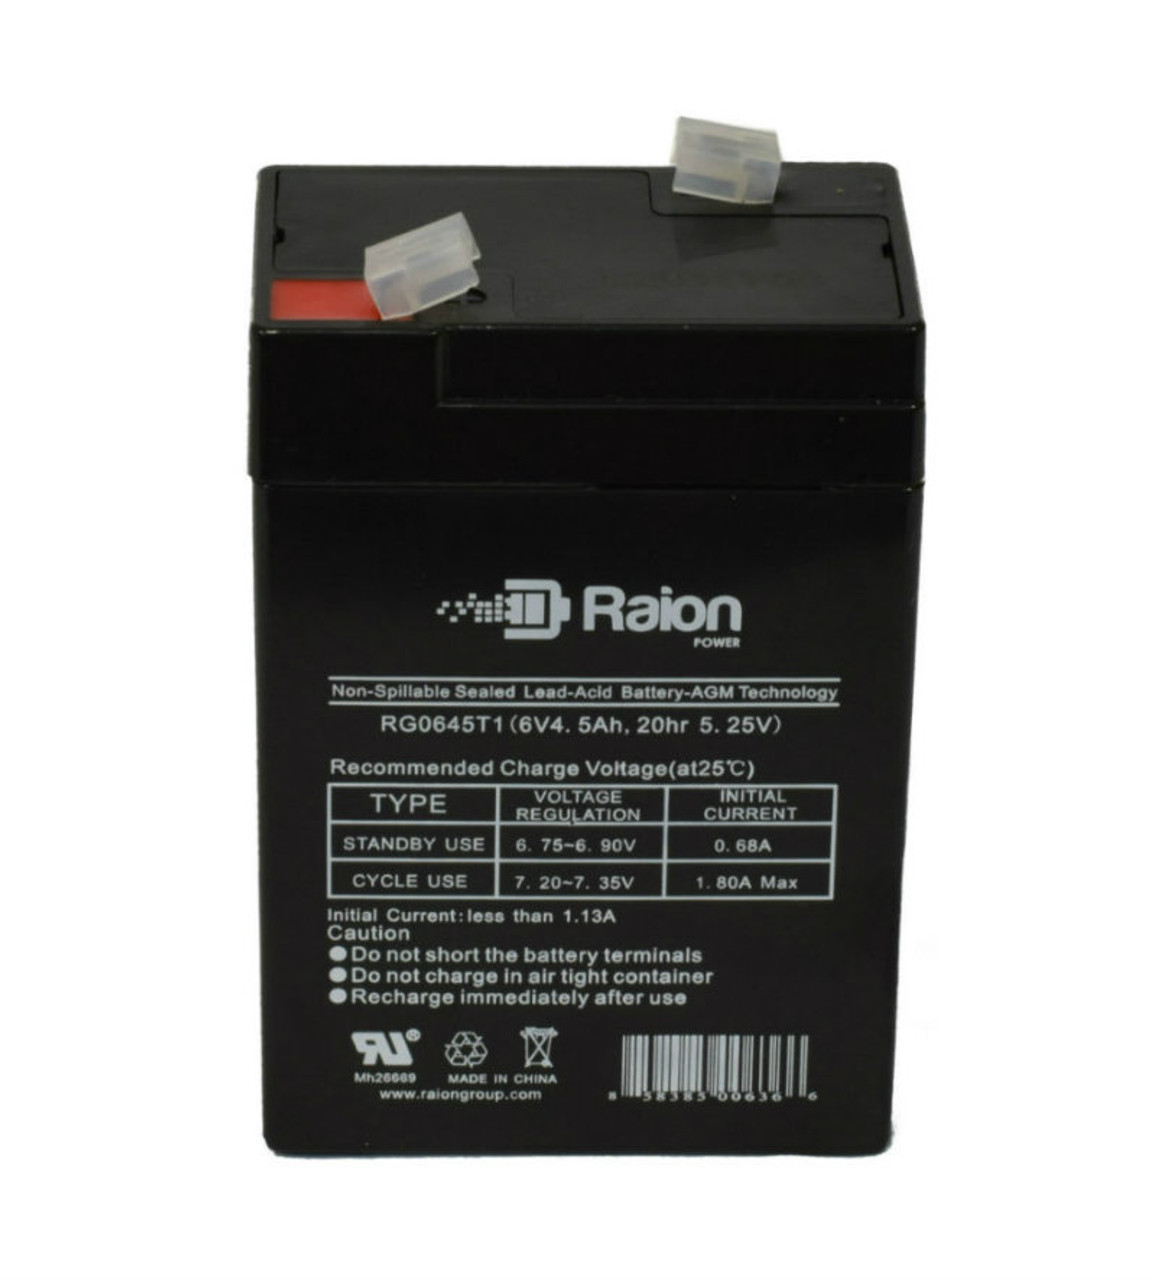 Raion Power RG0645T1 Replacement Battery Cartridge for Sentry Lite PM640